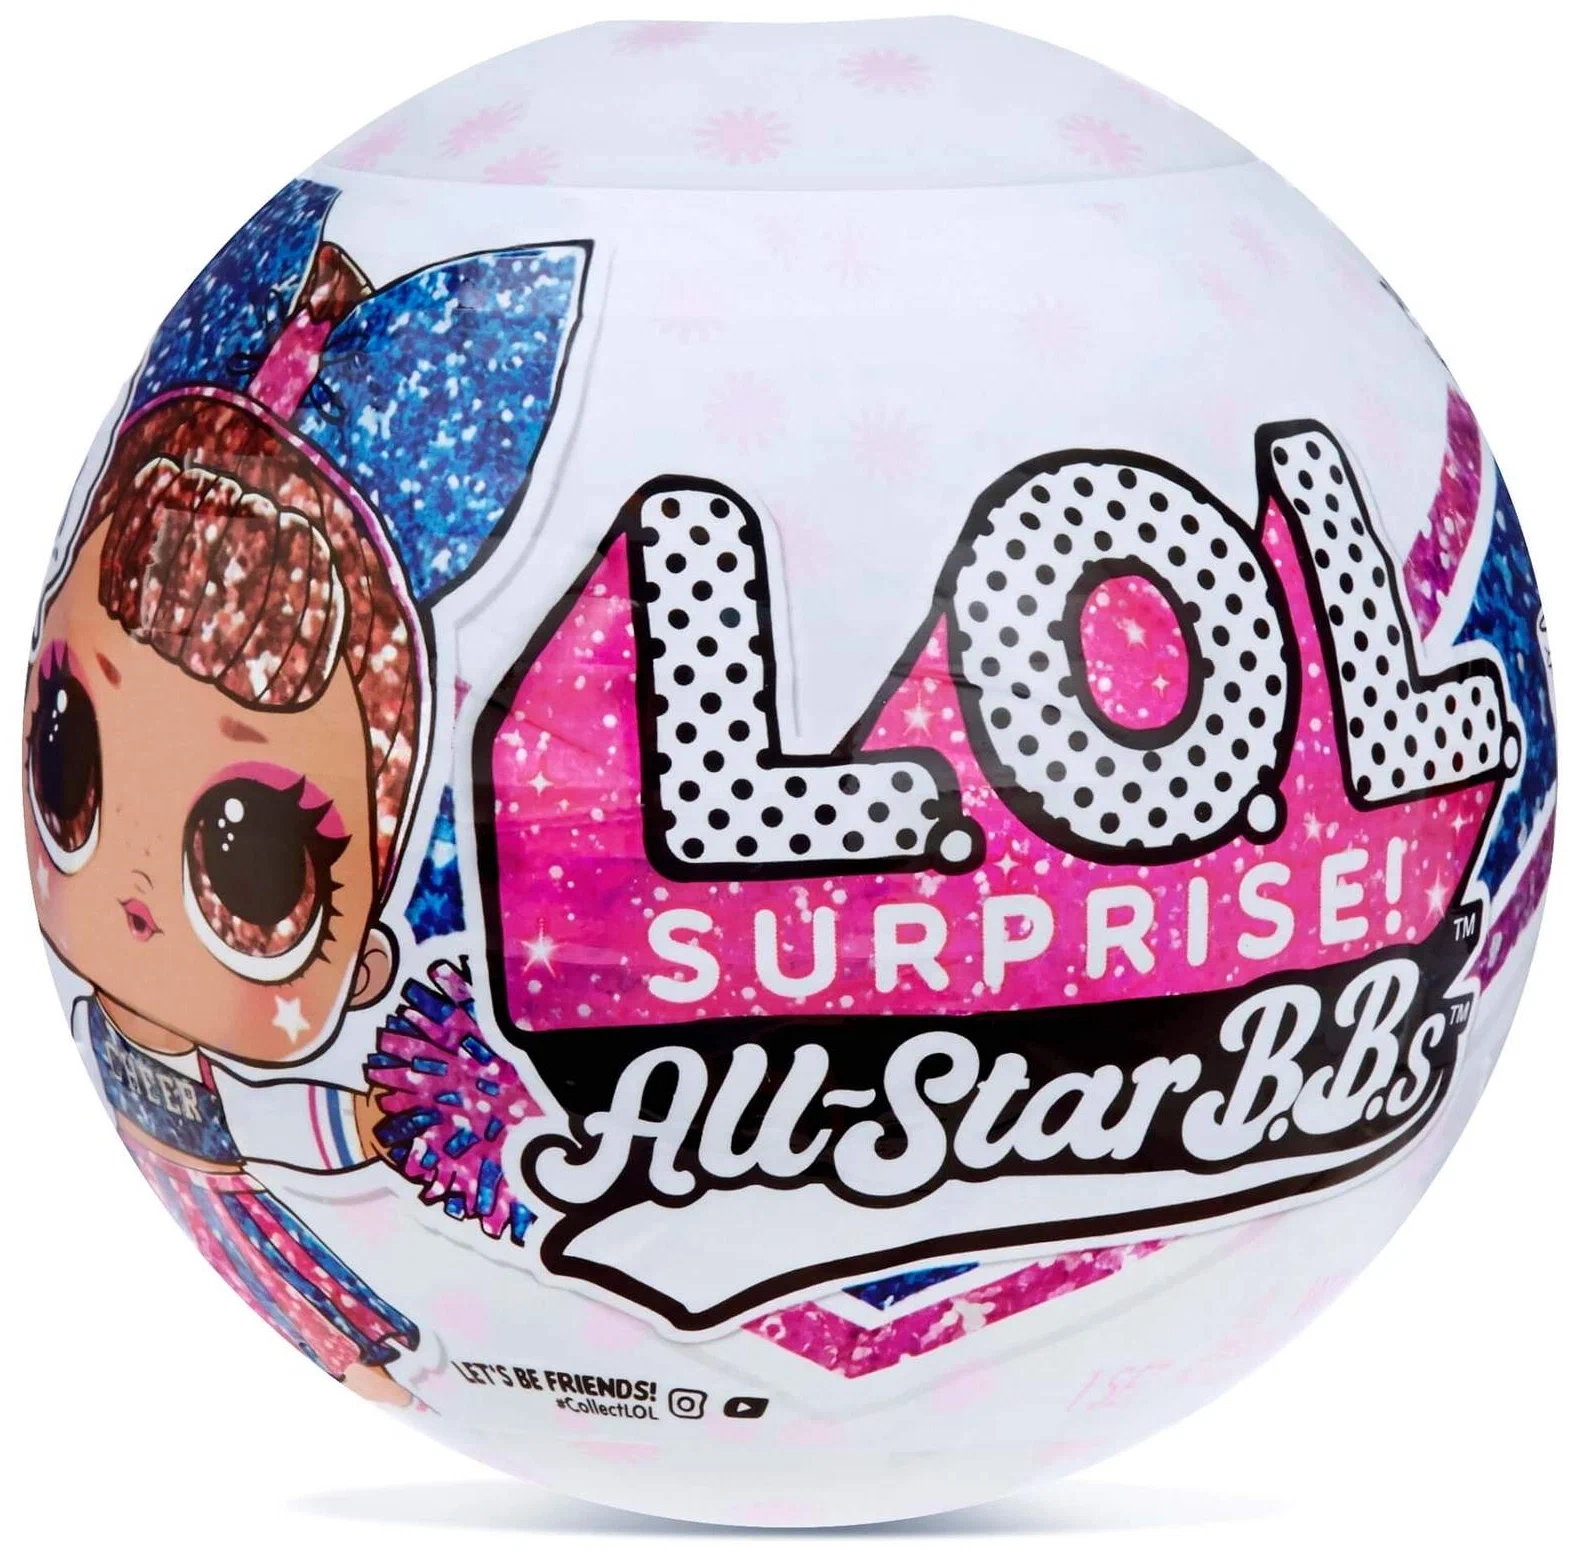 Кукла-сюрприз L.O.L. Surprise All-Star B.B.s Sports Series 2 Cheer Team Sparkly Do giant foam finger universal eva foam hand pom pom sports noise makers cheer pom poms with we re number 1 words for sports party